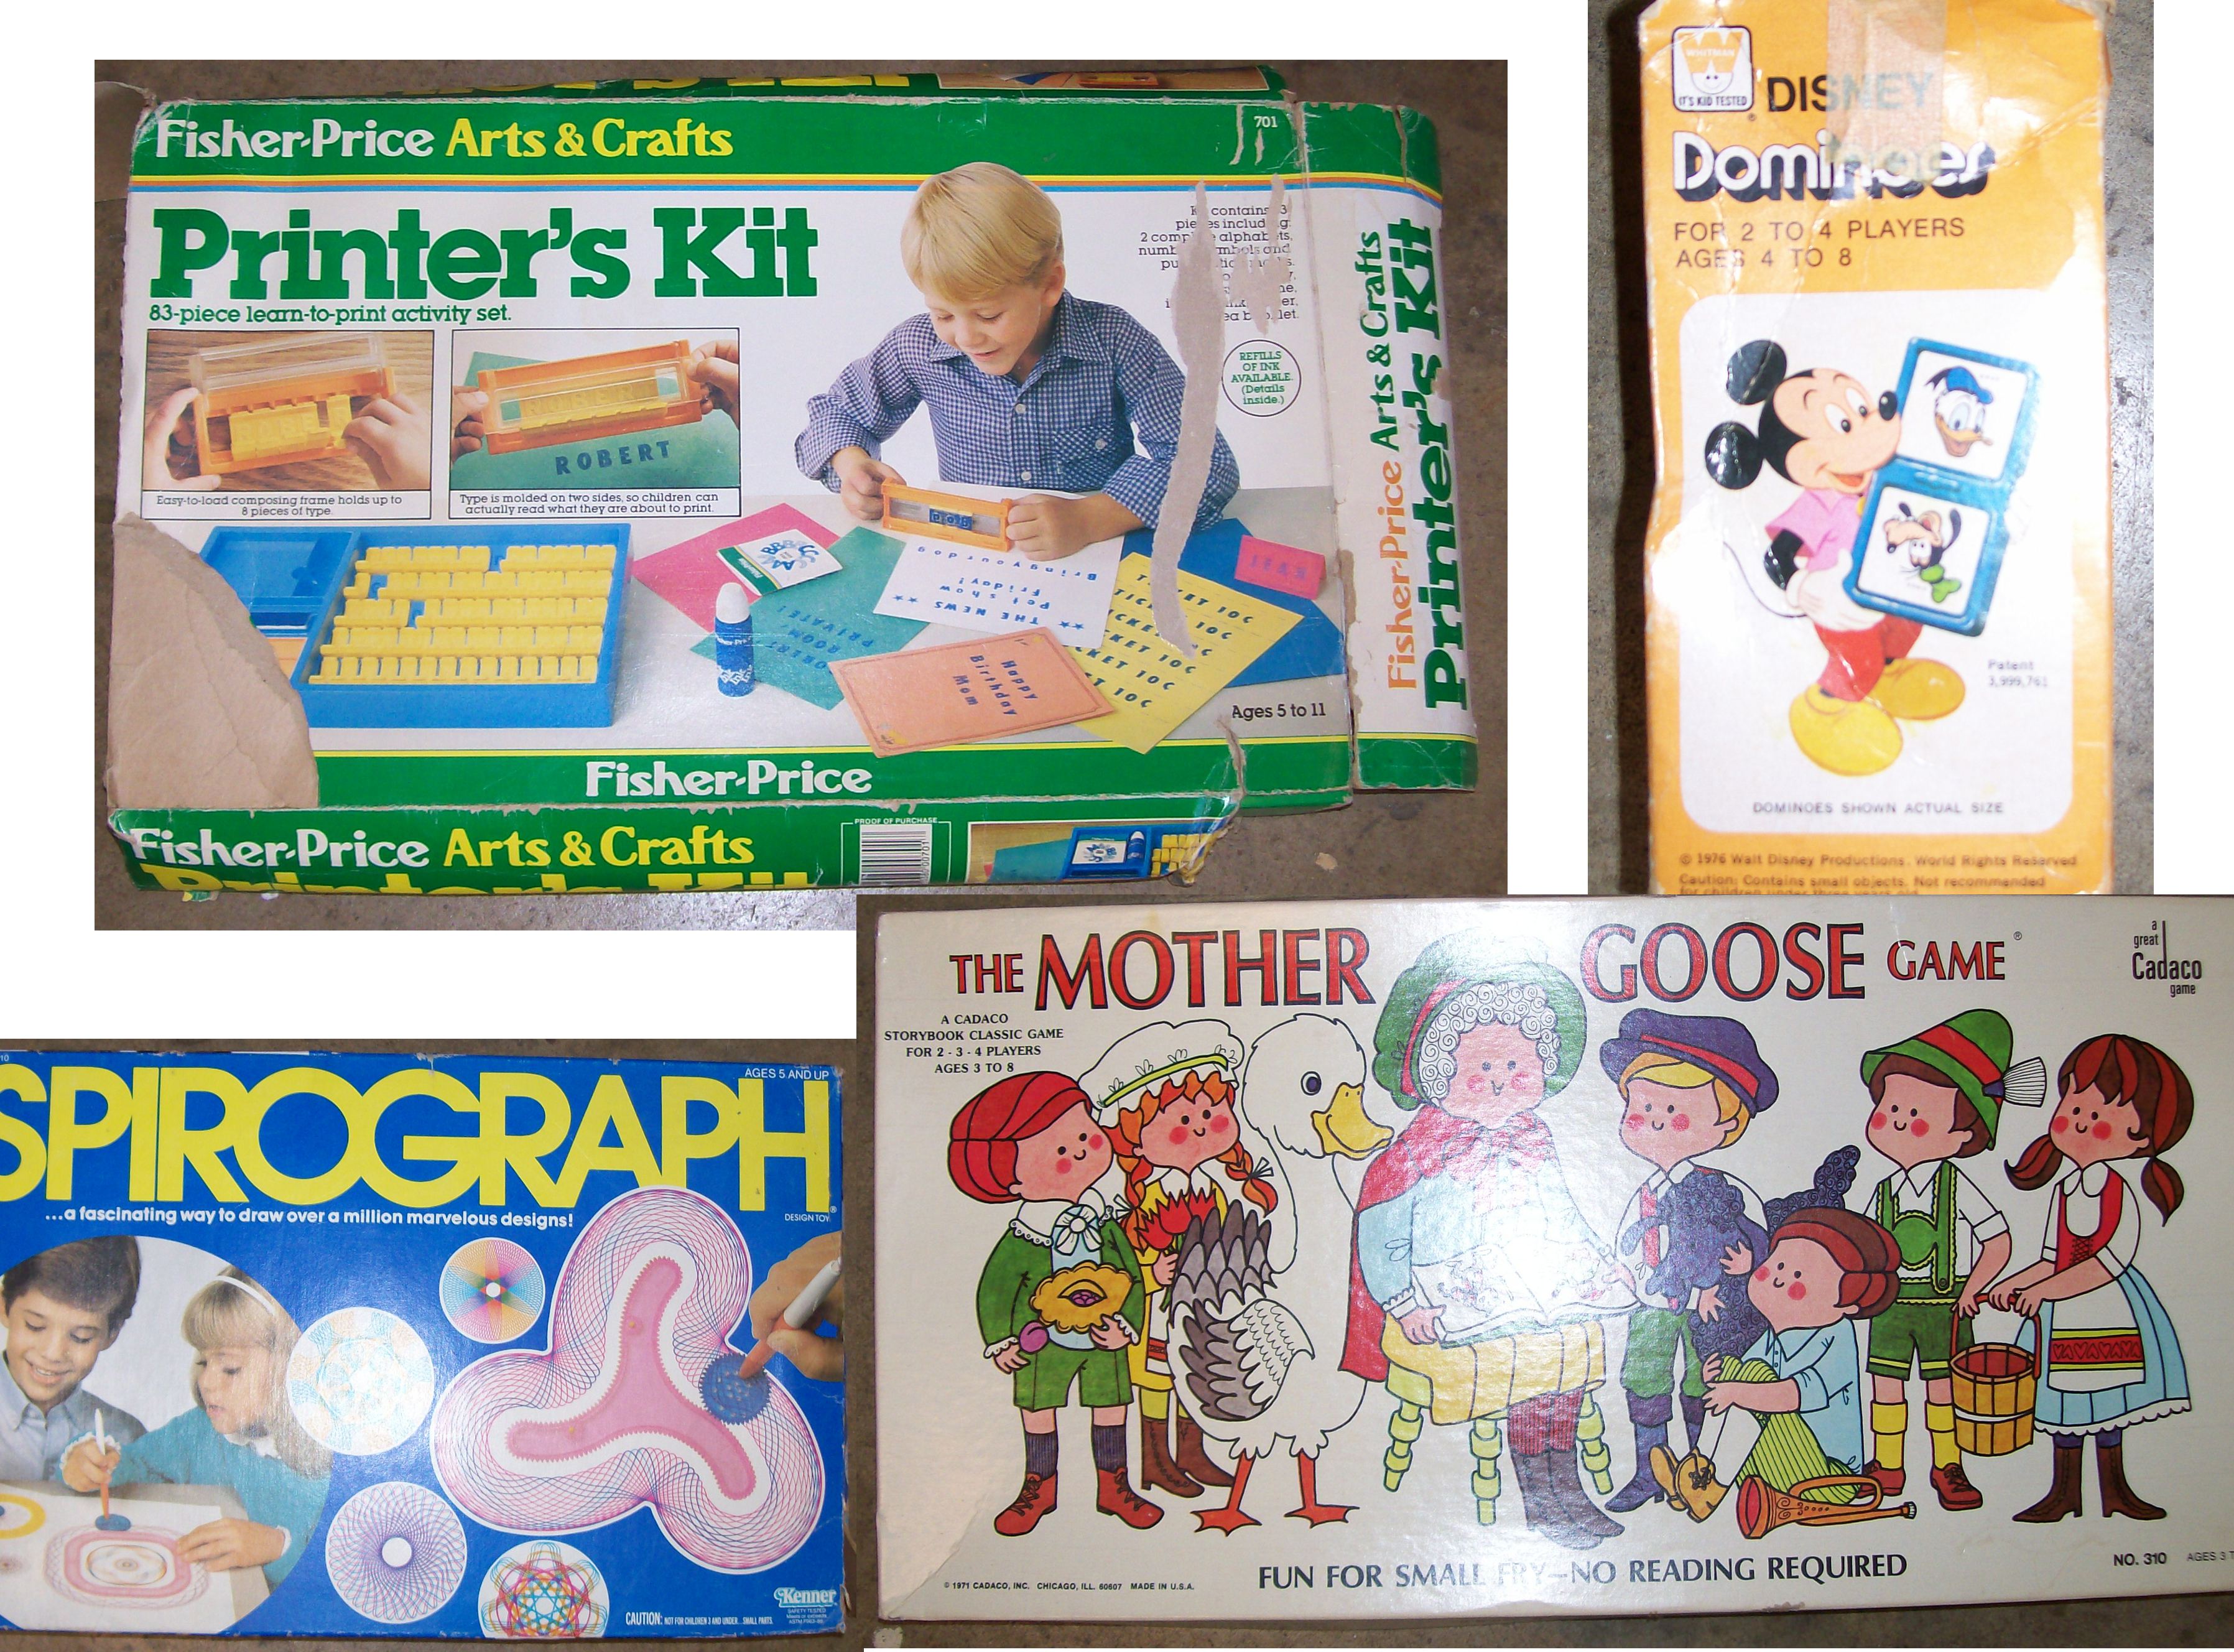 toy - Fisher Price Arts & Crafts Dis Domise Printer's Kit Fop 3 Toplayers Aget Toe Fisher Price Arts & Crafts Printer's Kit Fisher Price Fisher Price Arts & Crafts The Mother Goose Game Eile Spirograph ... Fun For Small To Reading Required